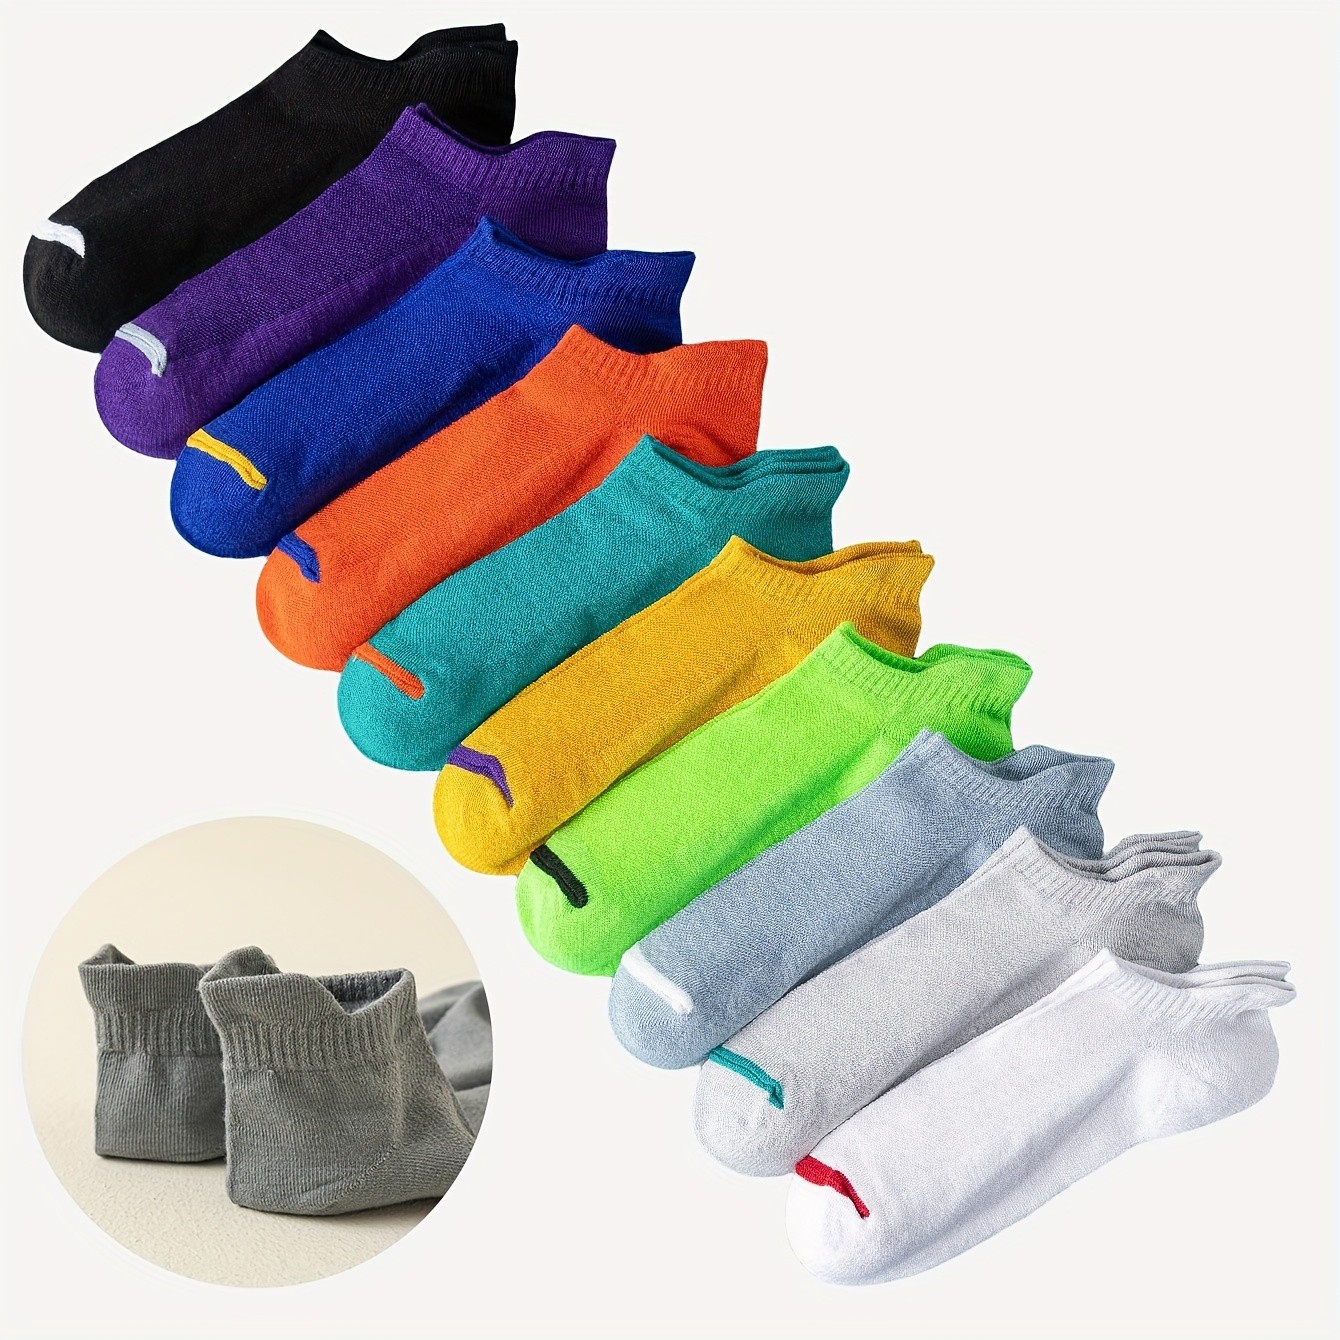 

10 Pairs Solid Ankle Socks, Casual & Comfy All-match Low Cut Socks, Women's Stockings & Hosiery